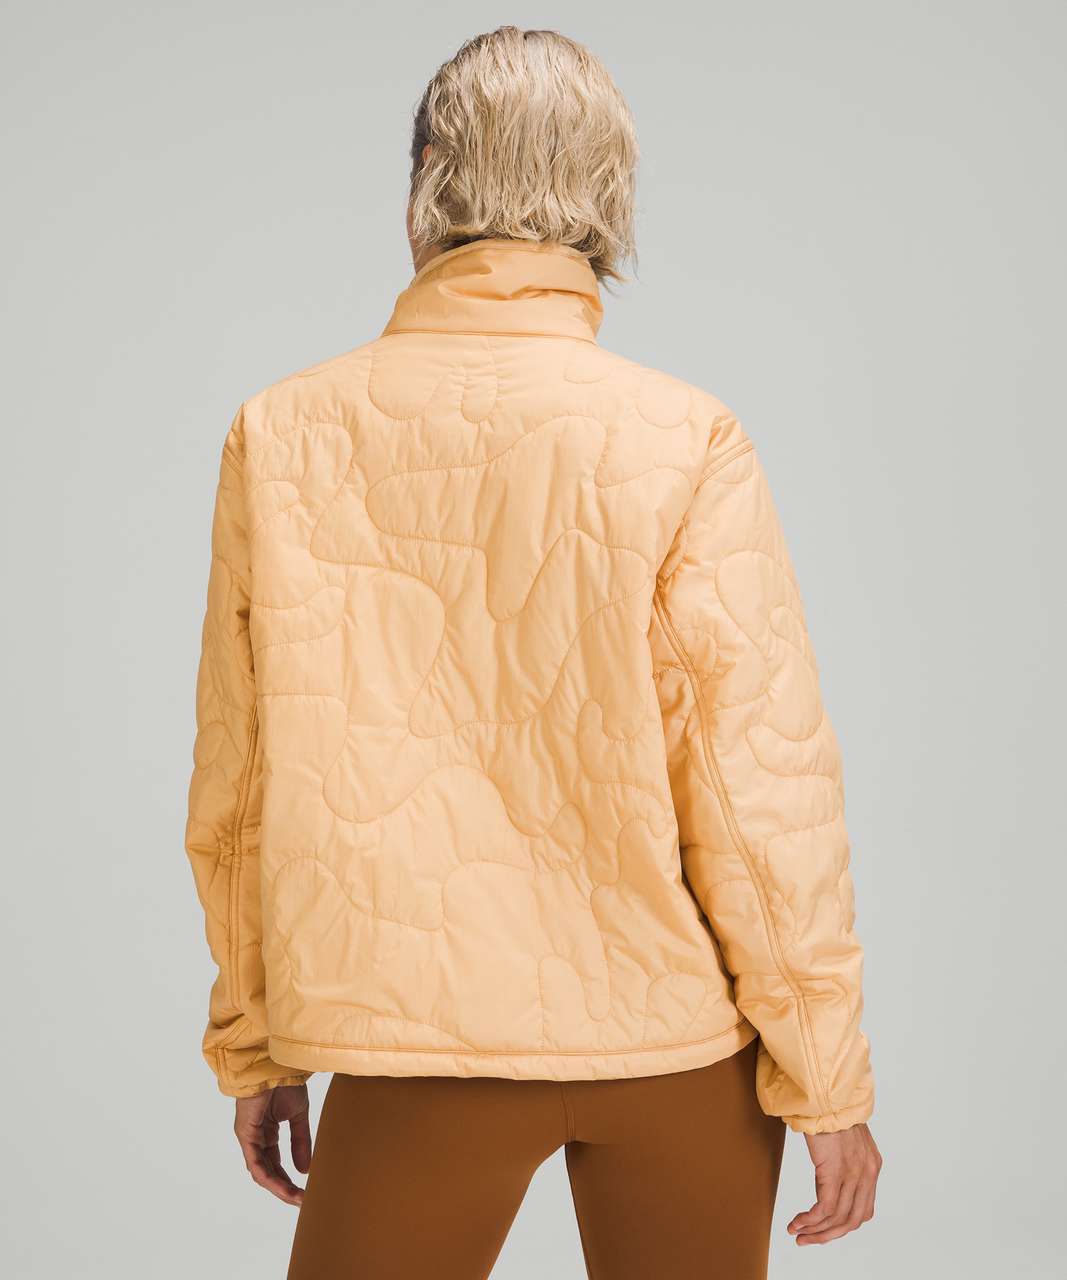 Lululemon Insulated Quilted Pullover Jacket - Heathered Pecan Tan